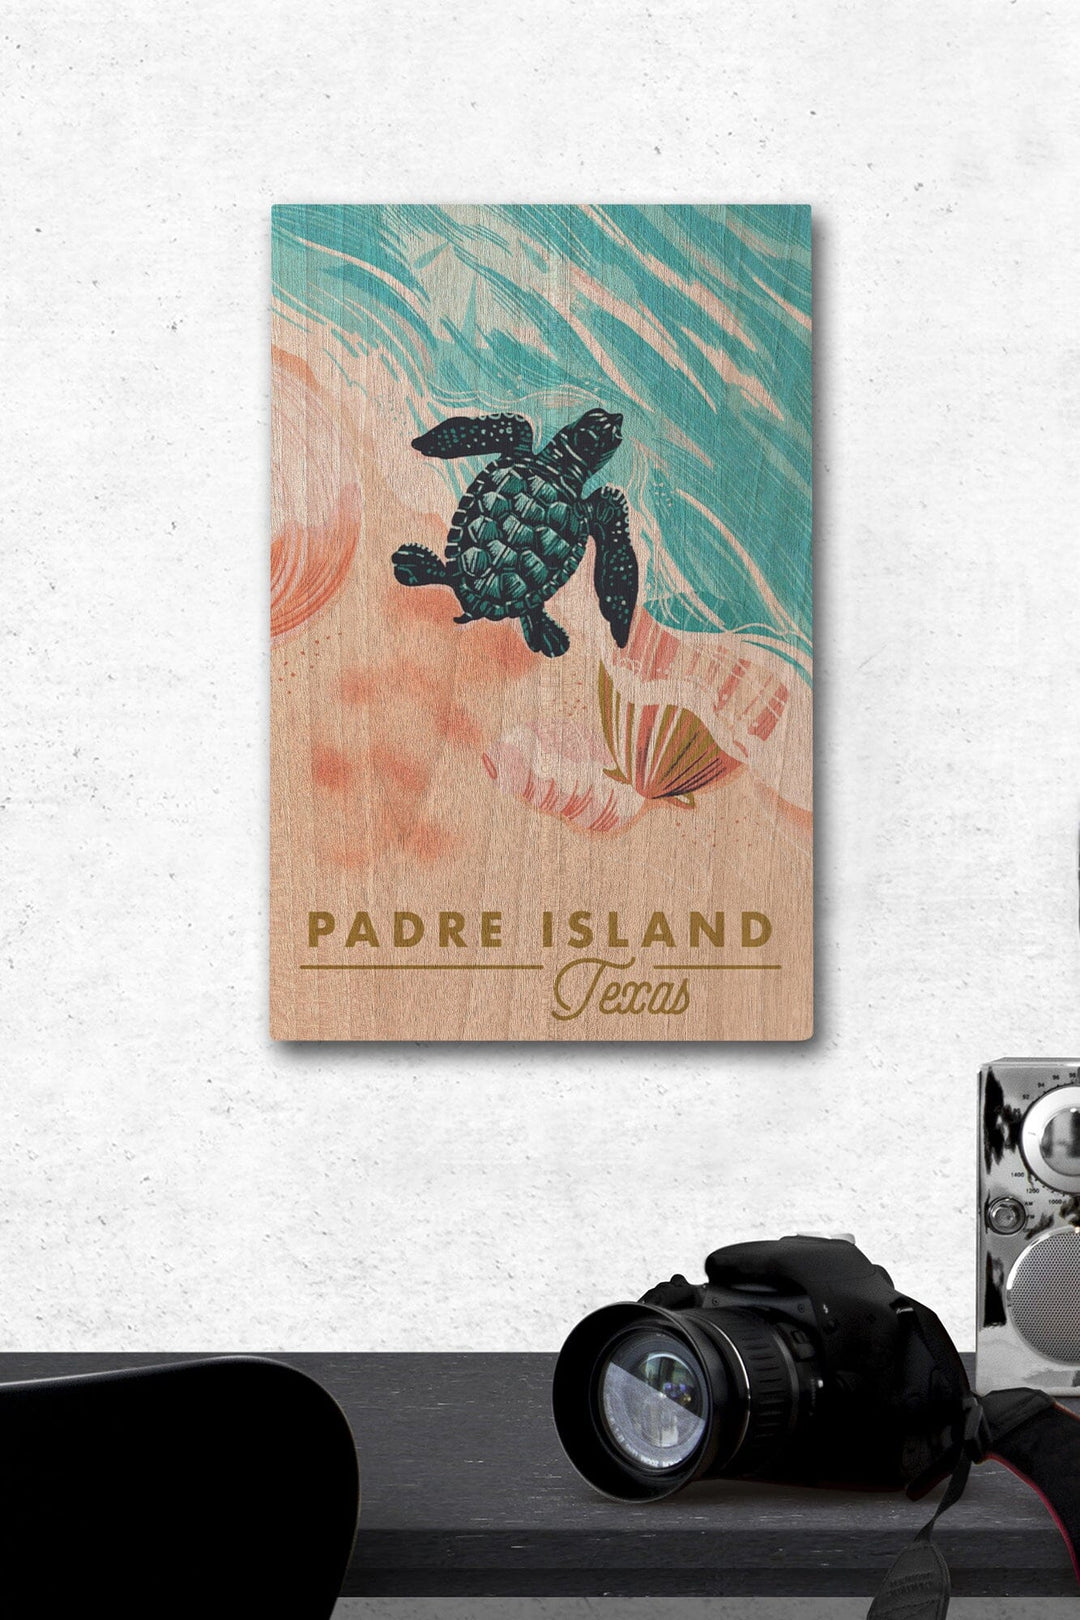 Padre Island, Texas, Courageous Explorer Collection, Turtle and Shells, Safely to Sea, Wood Signs and Postcards Wood Lantern Press 12 x 18 Wood Gallery Print 